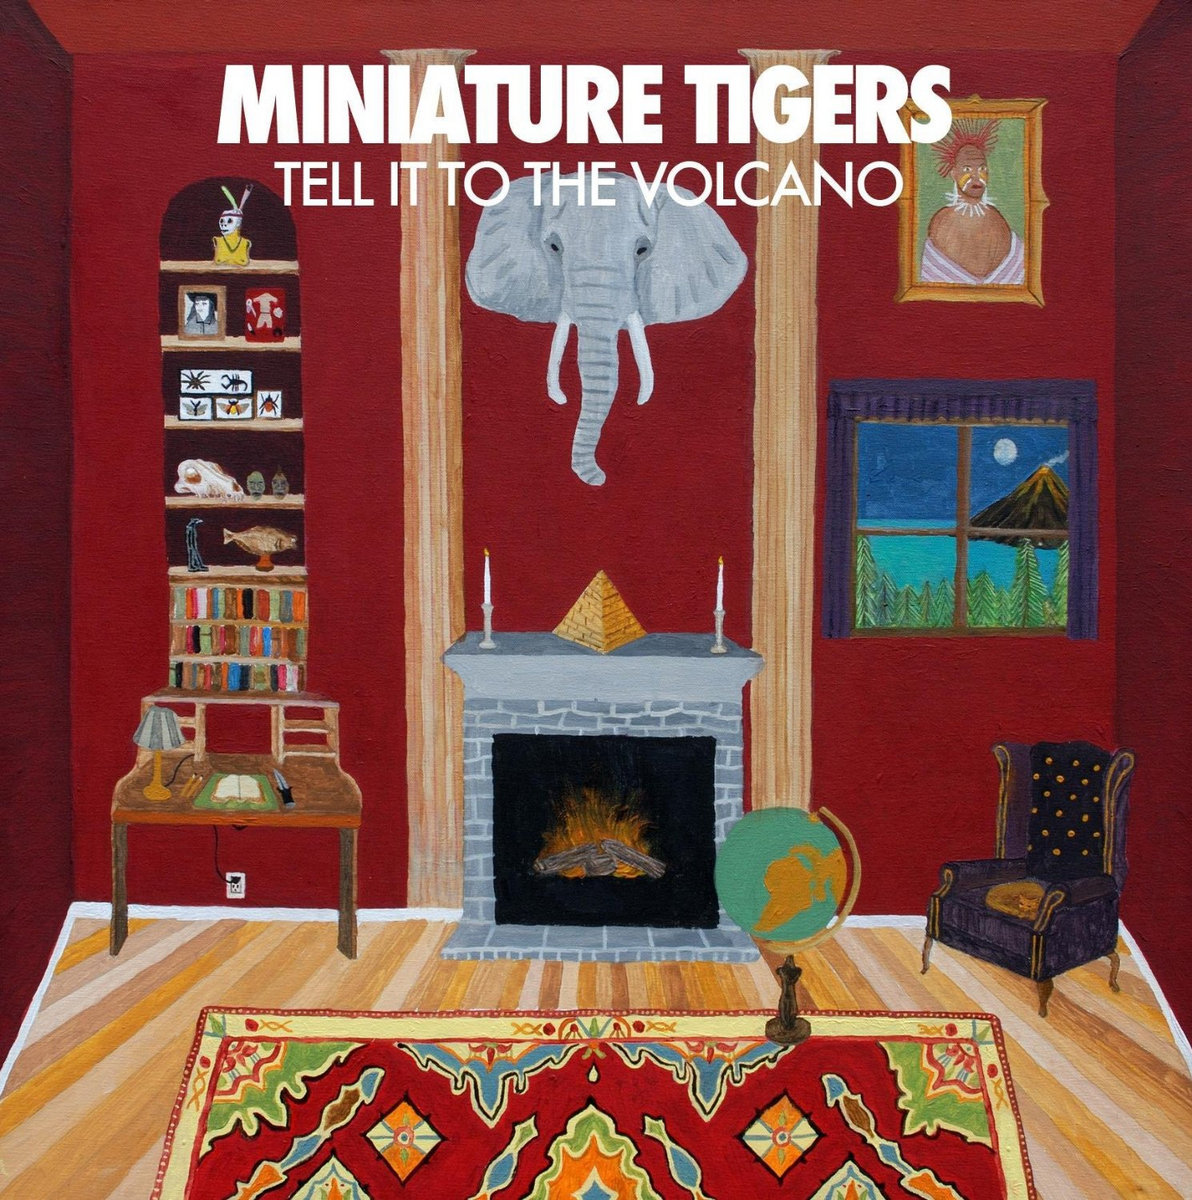 Miniature Tigers' album cover for "Tell It to the Volcano." A red painted room with wood floors and an elephant head hung above a fireplace. White text at the top-center of the photo that reads "Miniature Tigers Tell it to the Volcano"